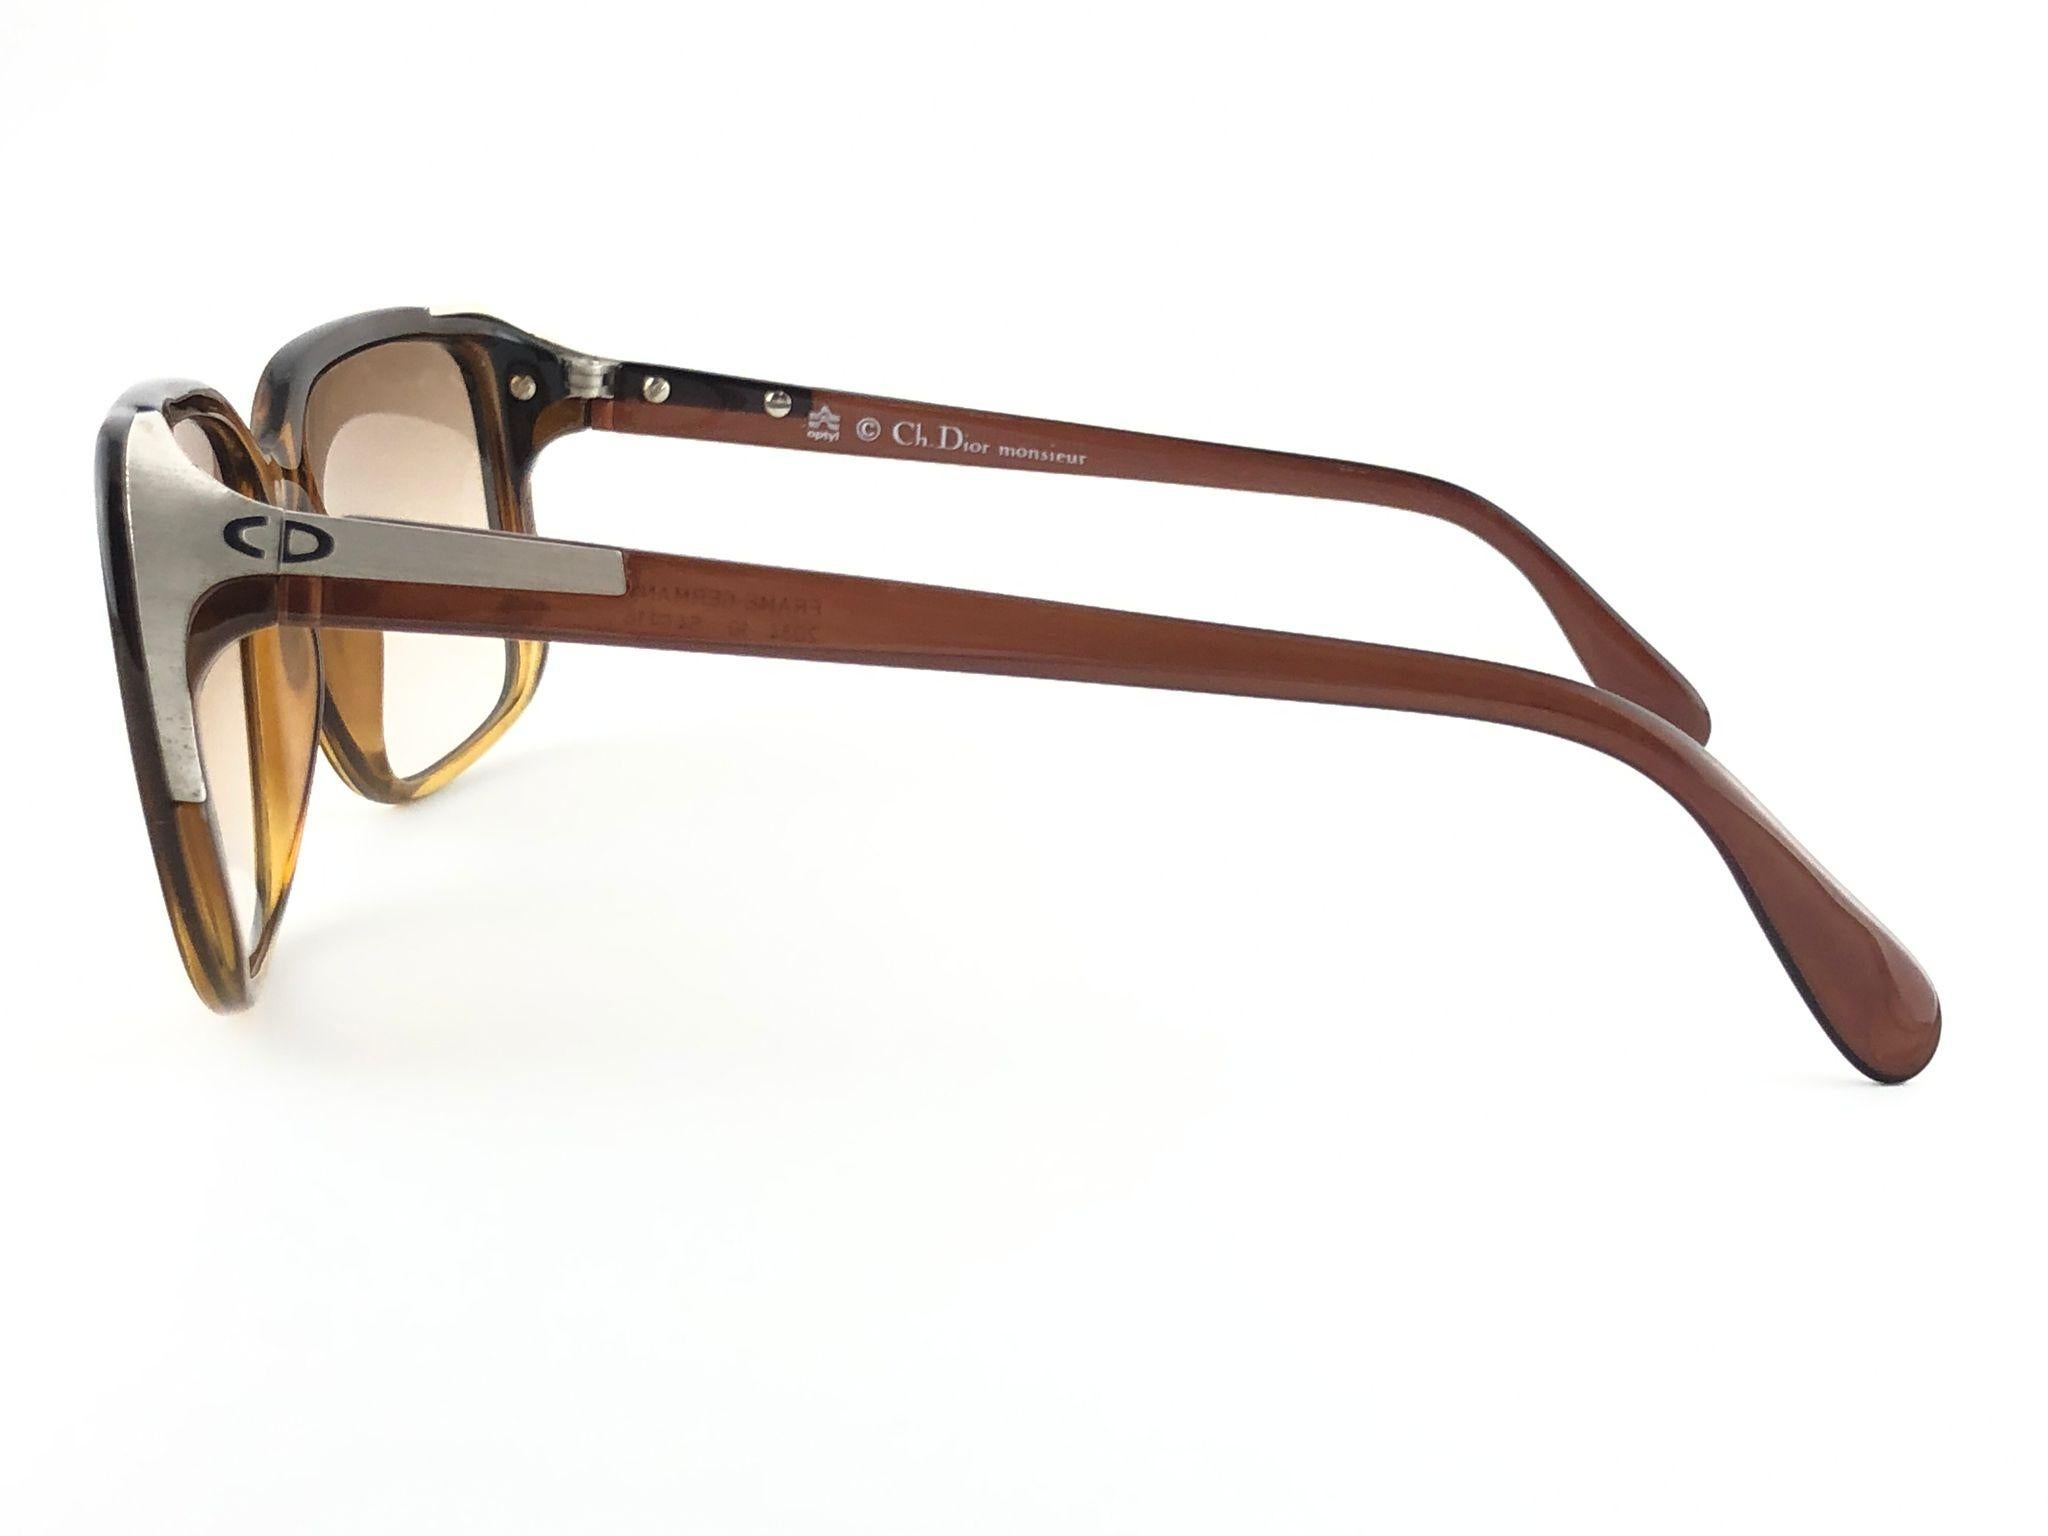 New vintage Christian Dior Monsieur two tone translucent amber frame with silver accents.

Spotless gradient light brown lenses.

New, never worn or displayed this item may show light sign of wear due to storage.

Made in Germany

Front :           